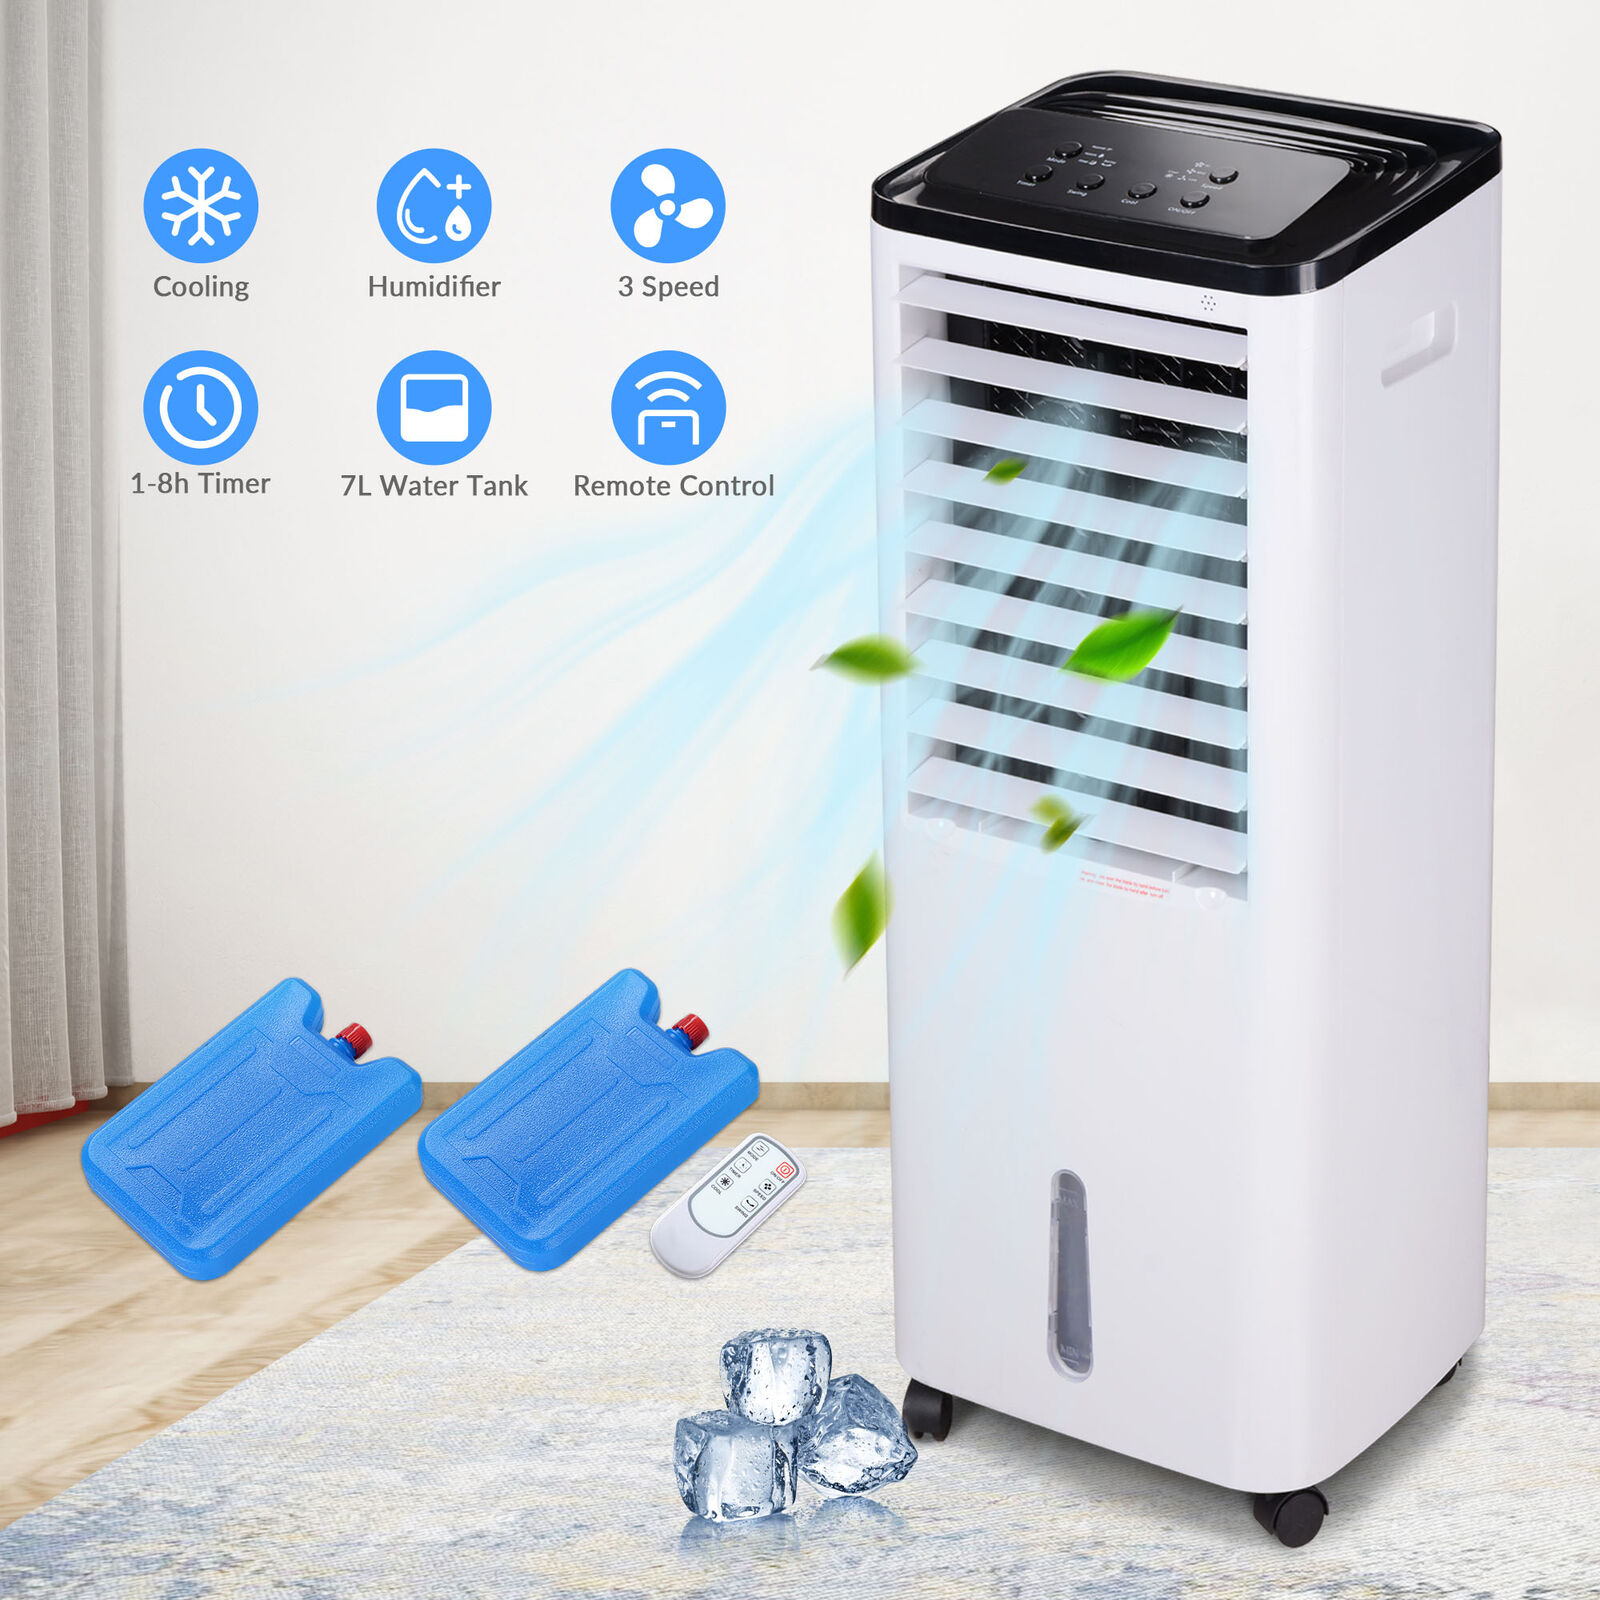 Image 1 - 200W Evaporative Air Cooler Fan Cooling Humidifier with Remote Control 17L